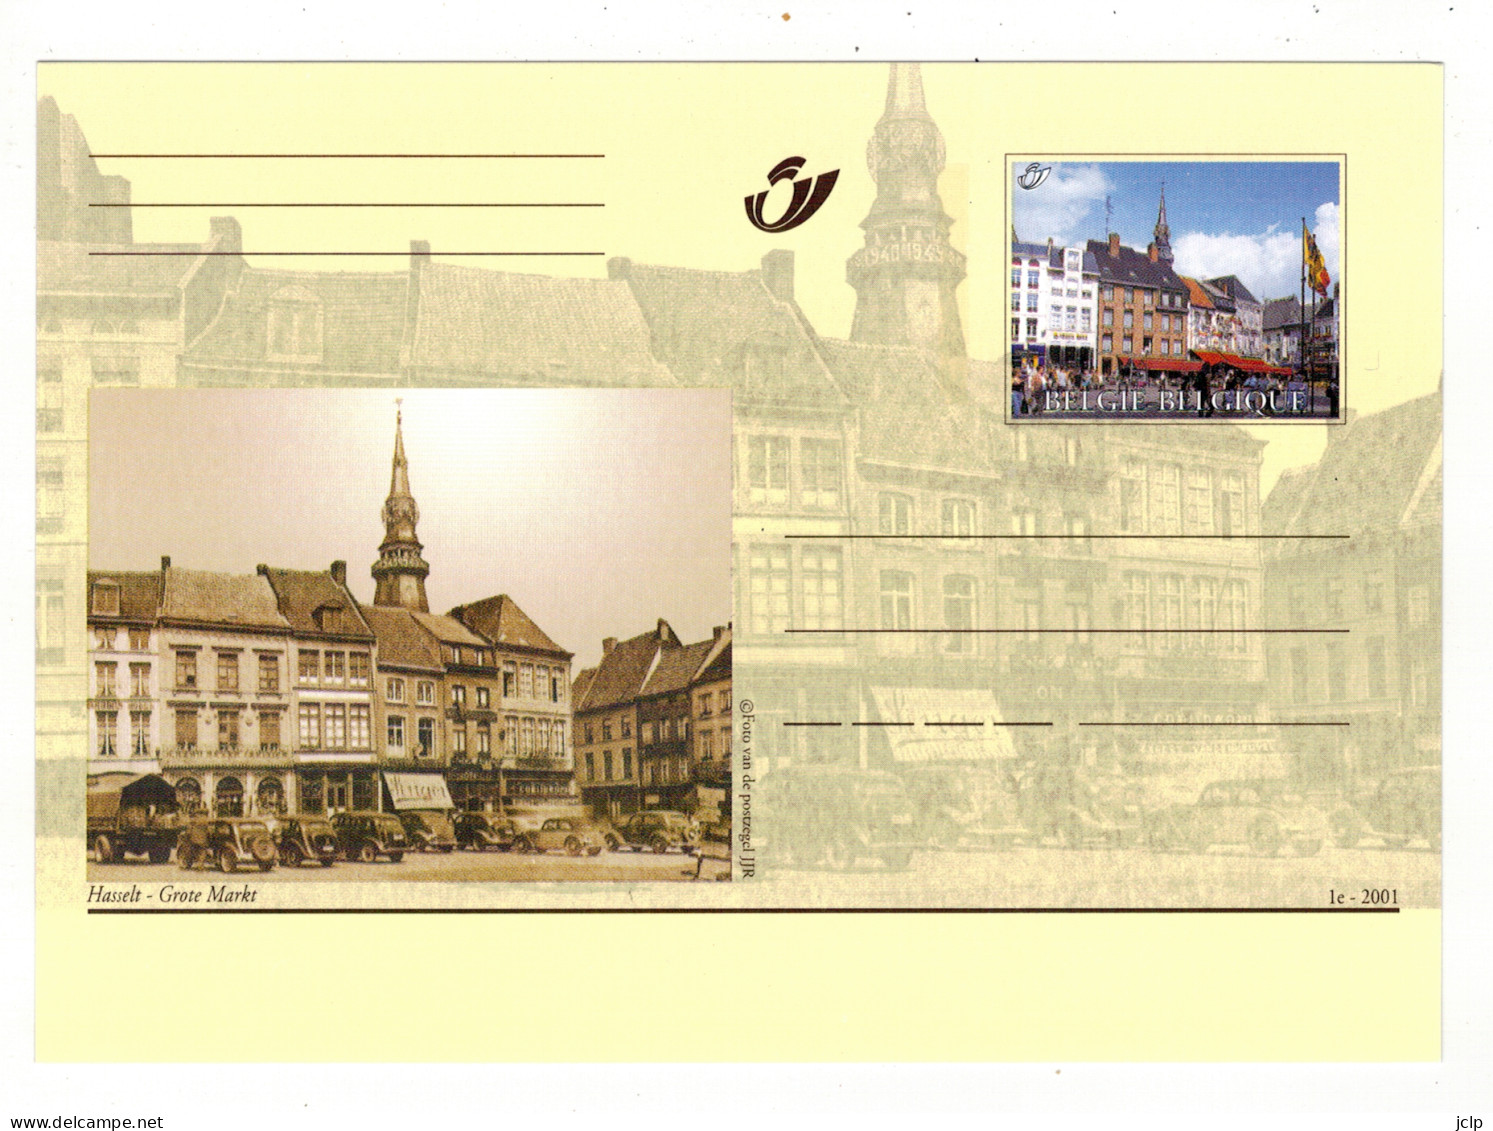 2001 - Hasselt - Grote Markt. - Souvenir Cards - Joint Issues [HK]